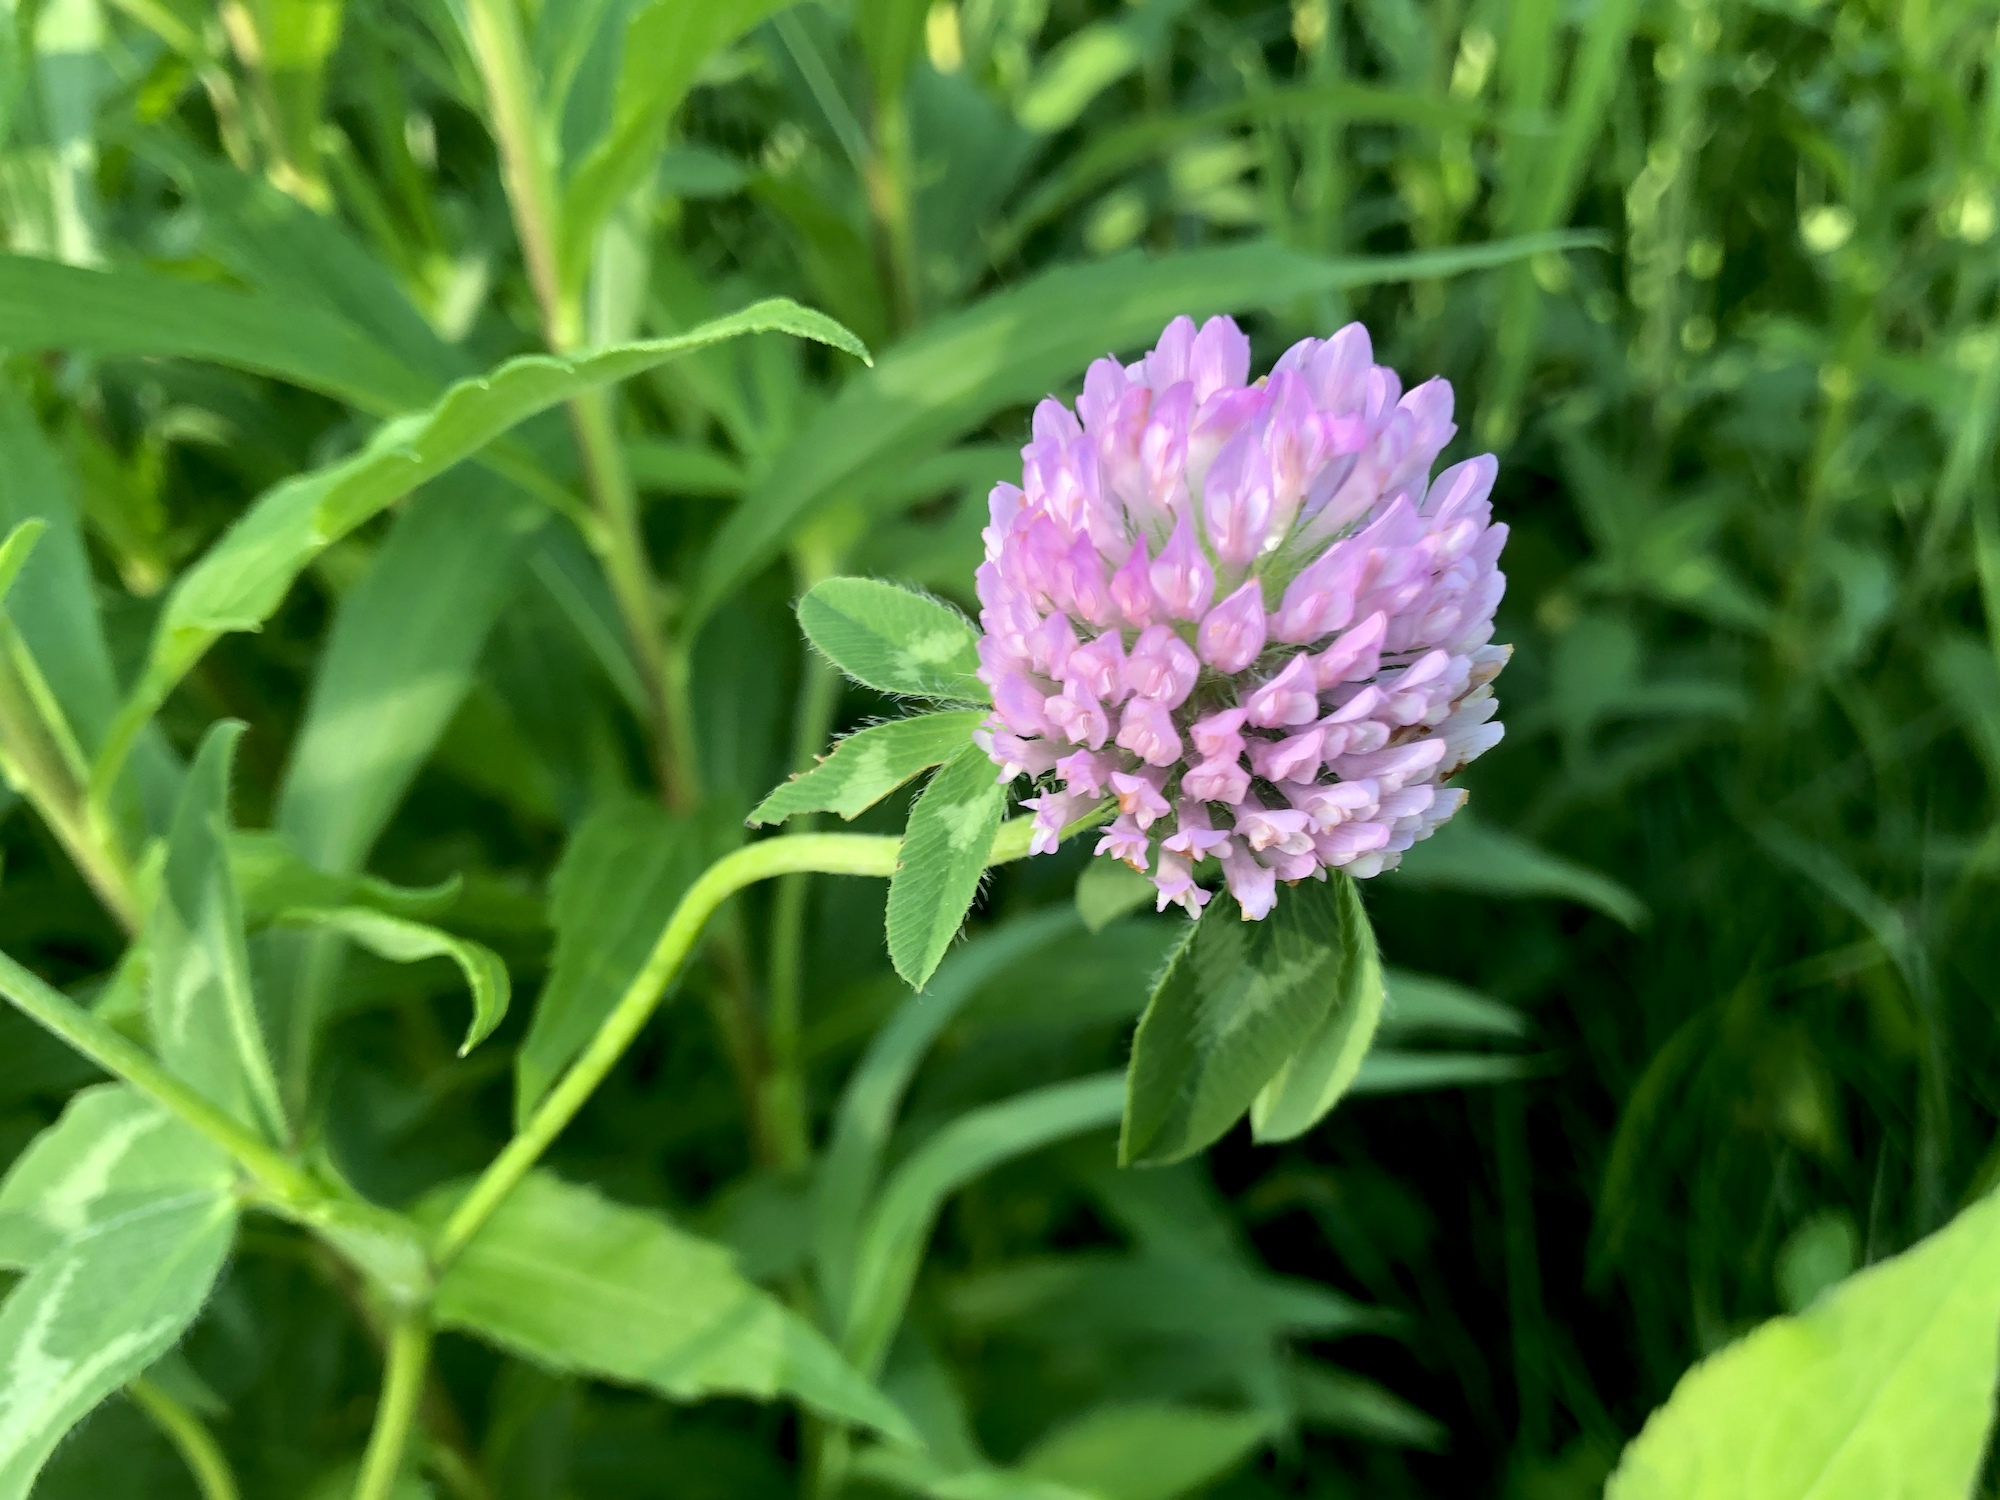 Red Clover around retaining pond at the corner of Manitou Way and Nakoma Road in Madison, Wisconsin on June 13, 2019.